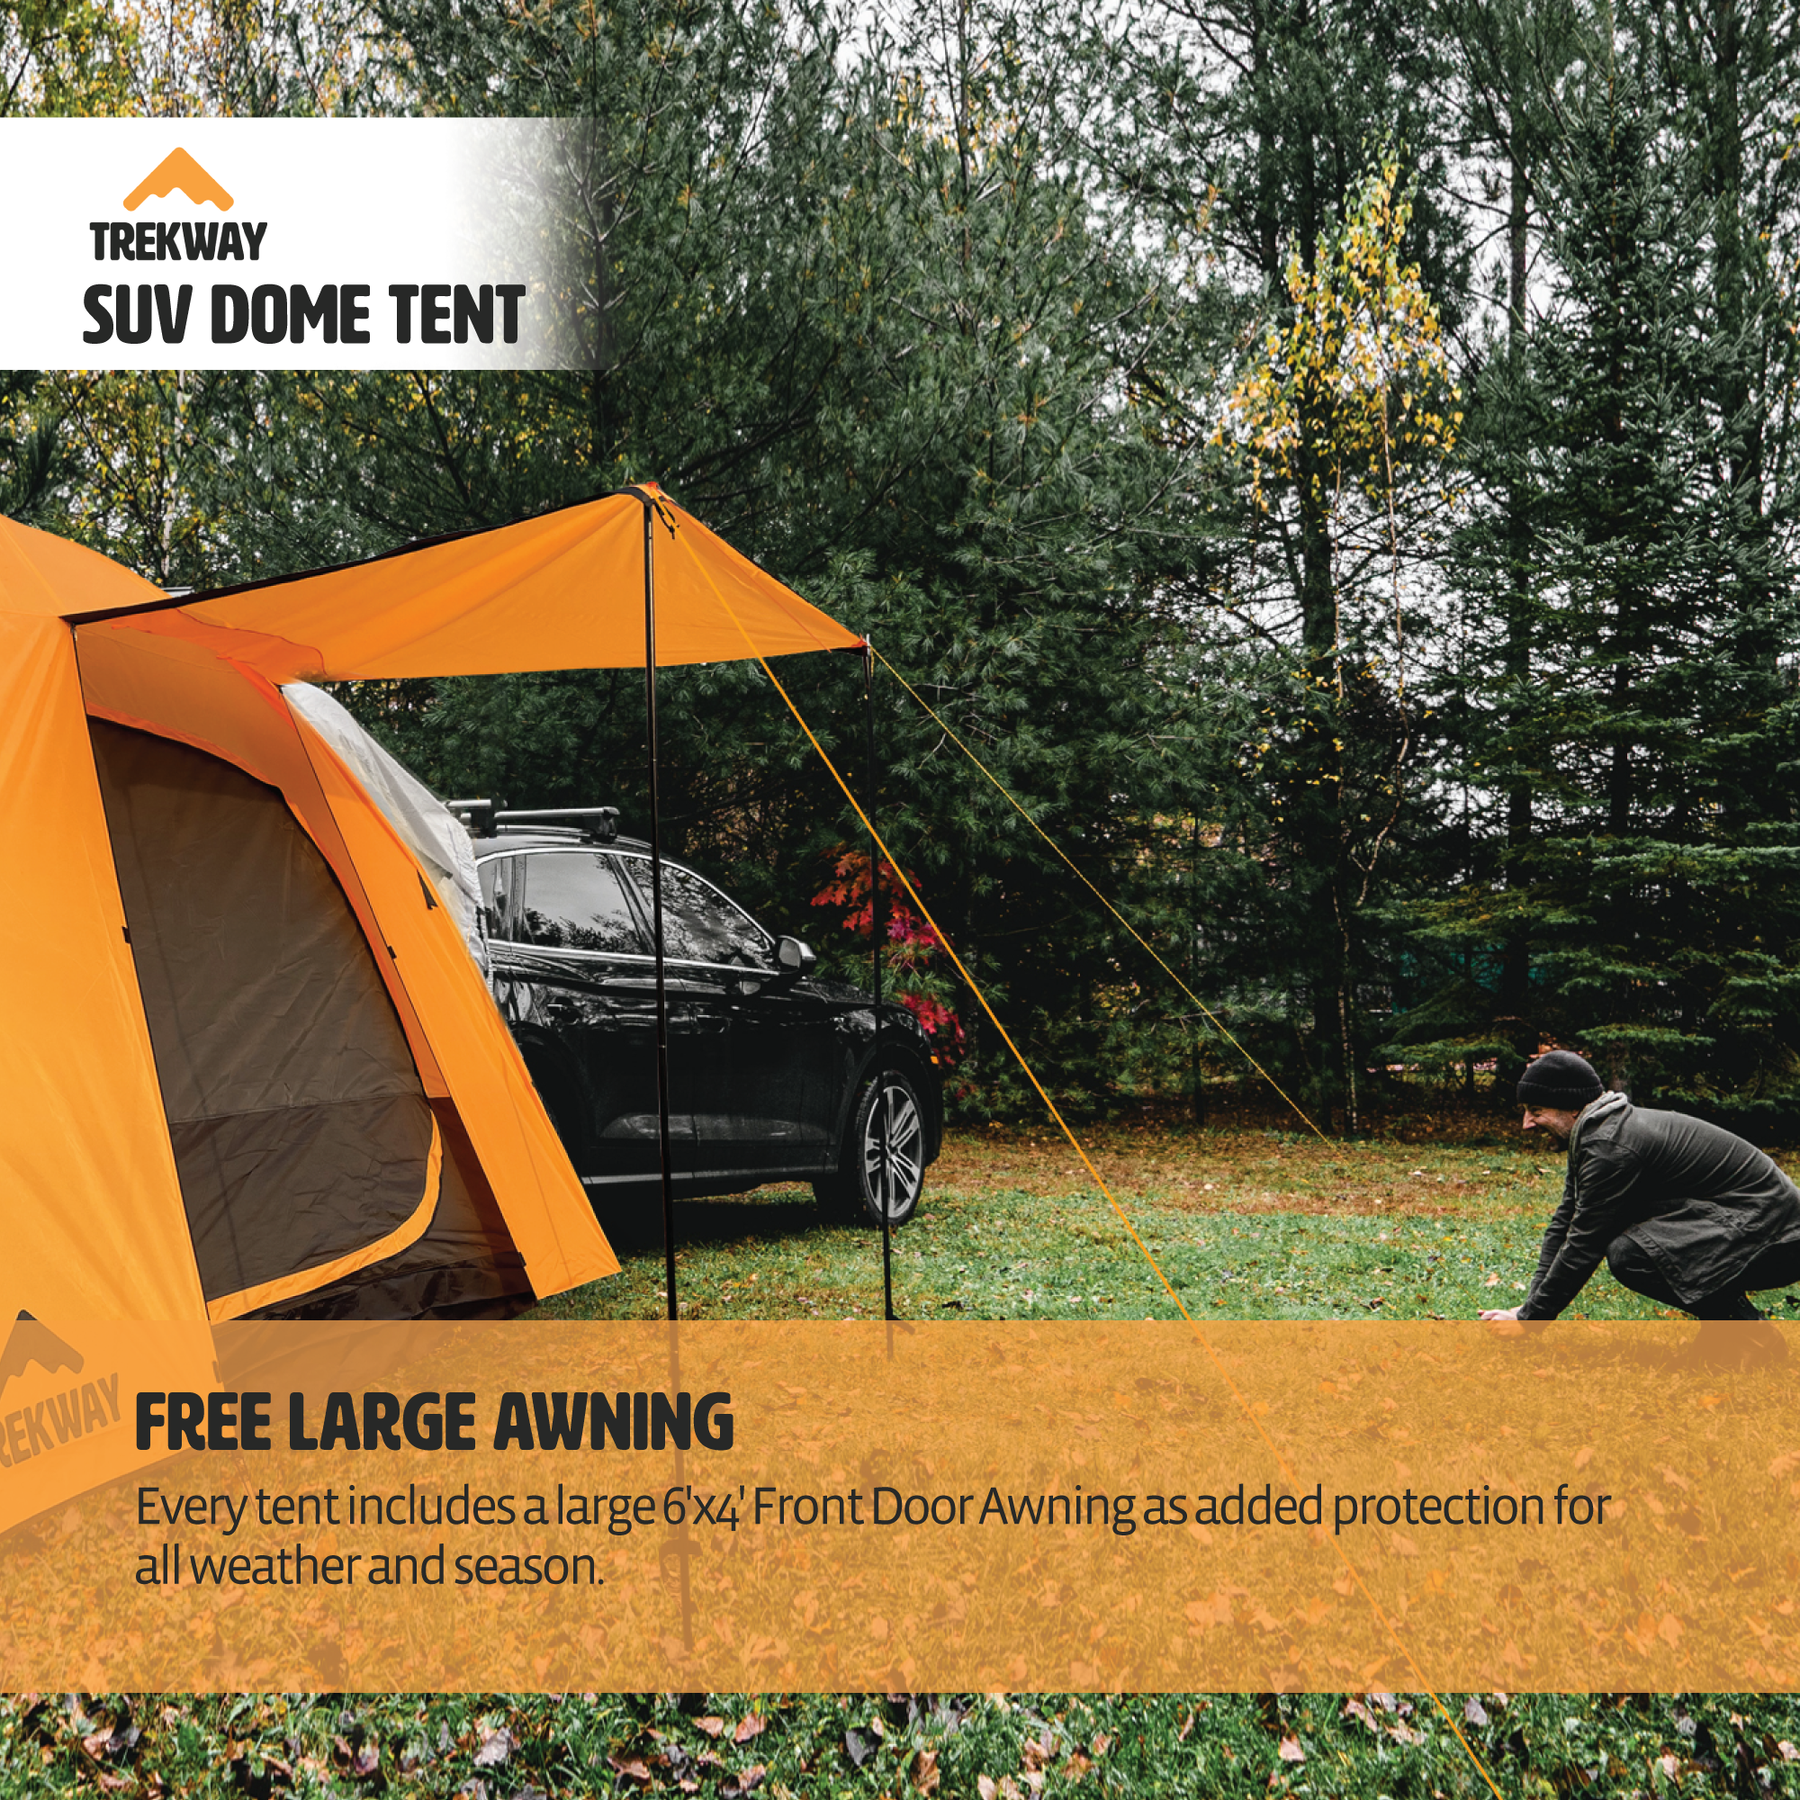 Trekway SUV Dome Tent for Subaru Outback/Forester, Rav4